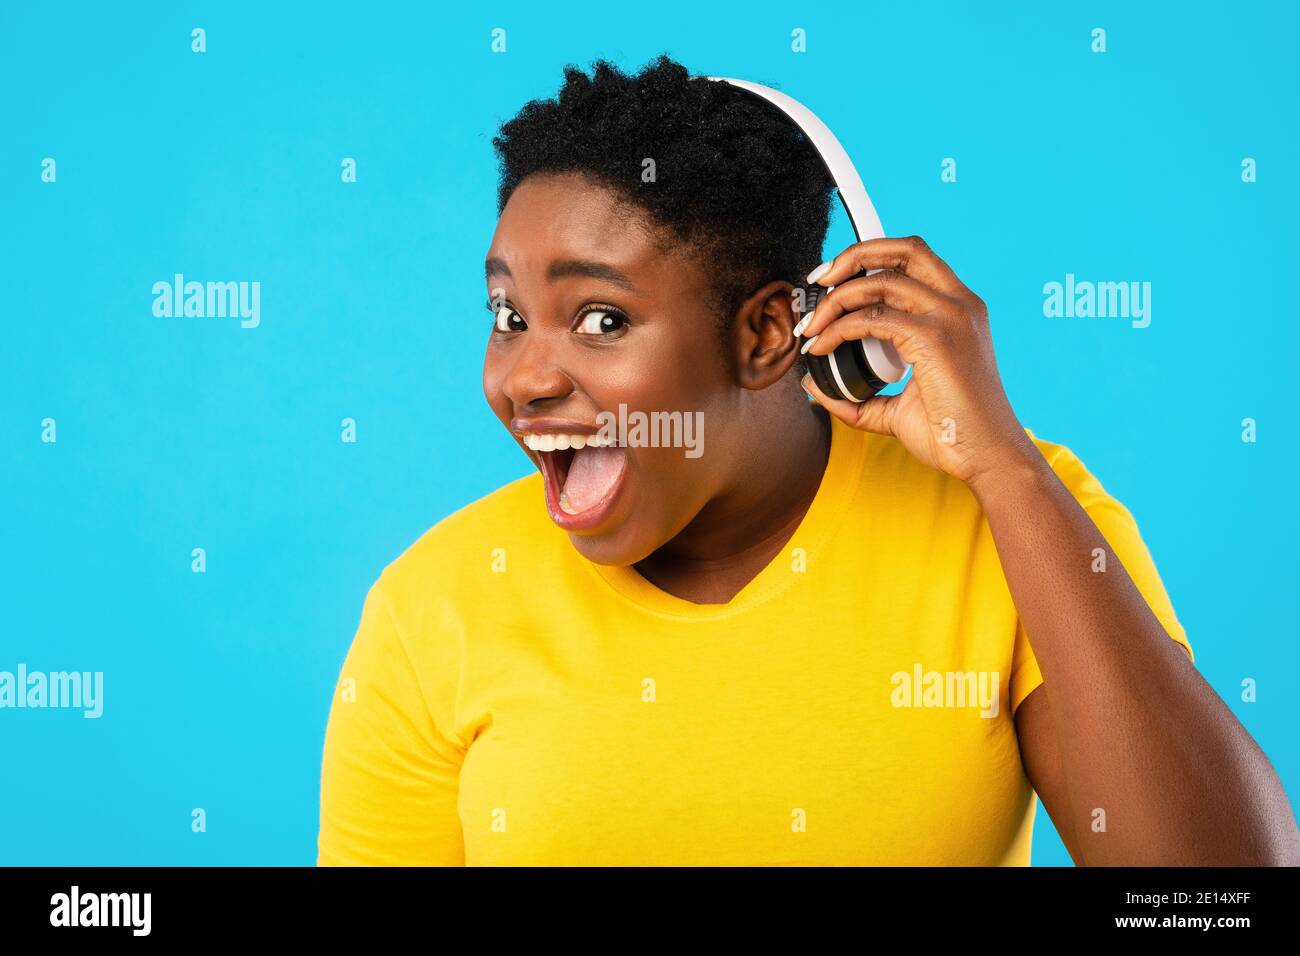 Funny Black Woman Taking Off Headphones Listening Music, Blue Background Stock Photo